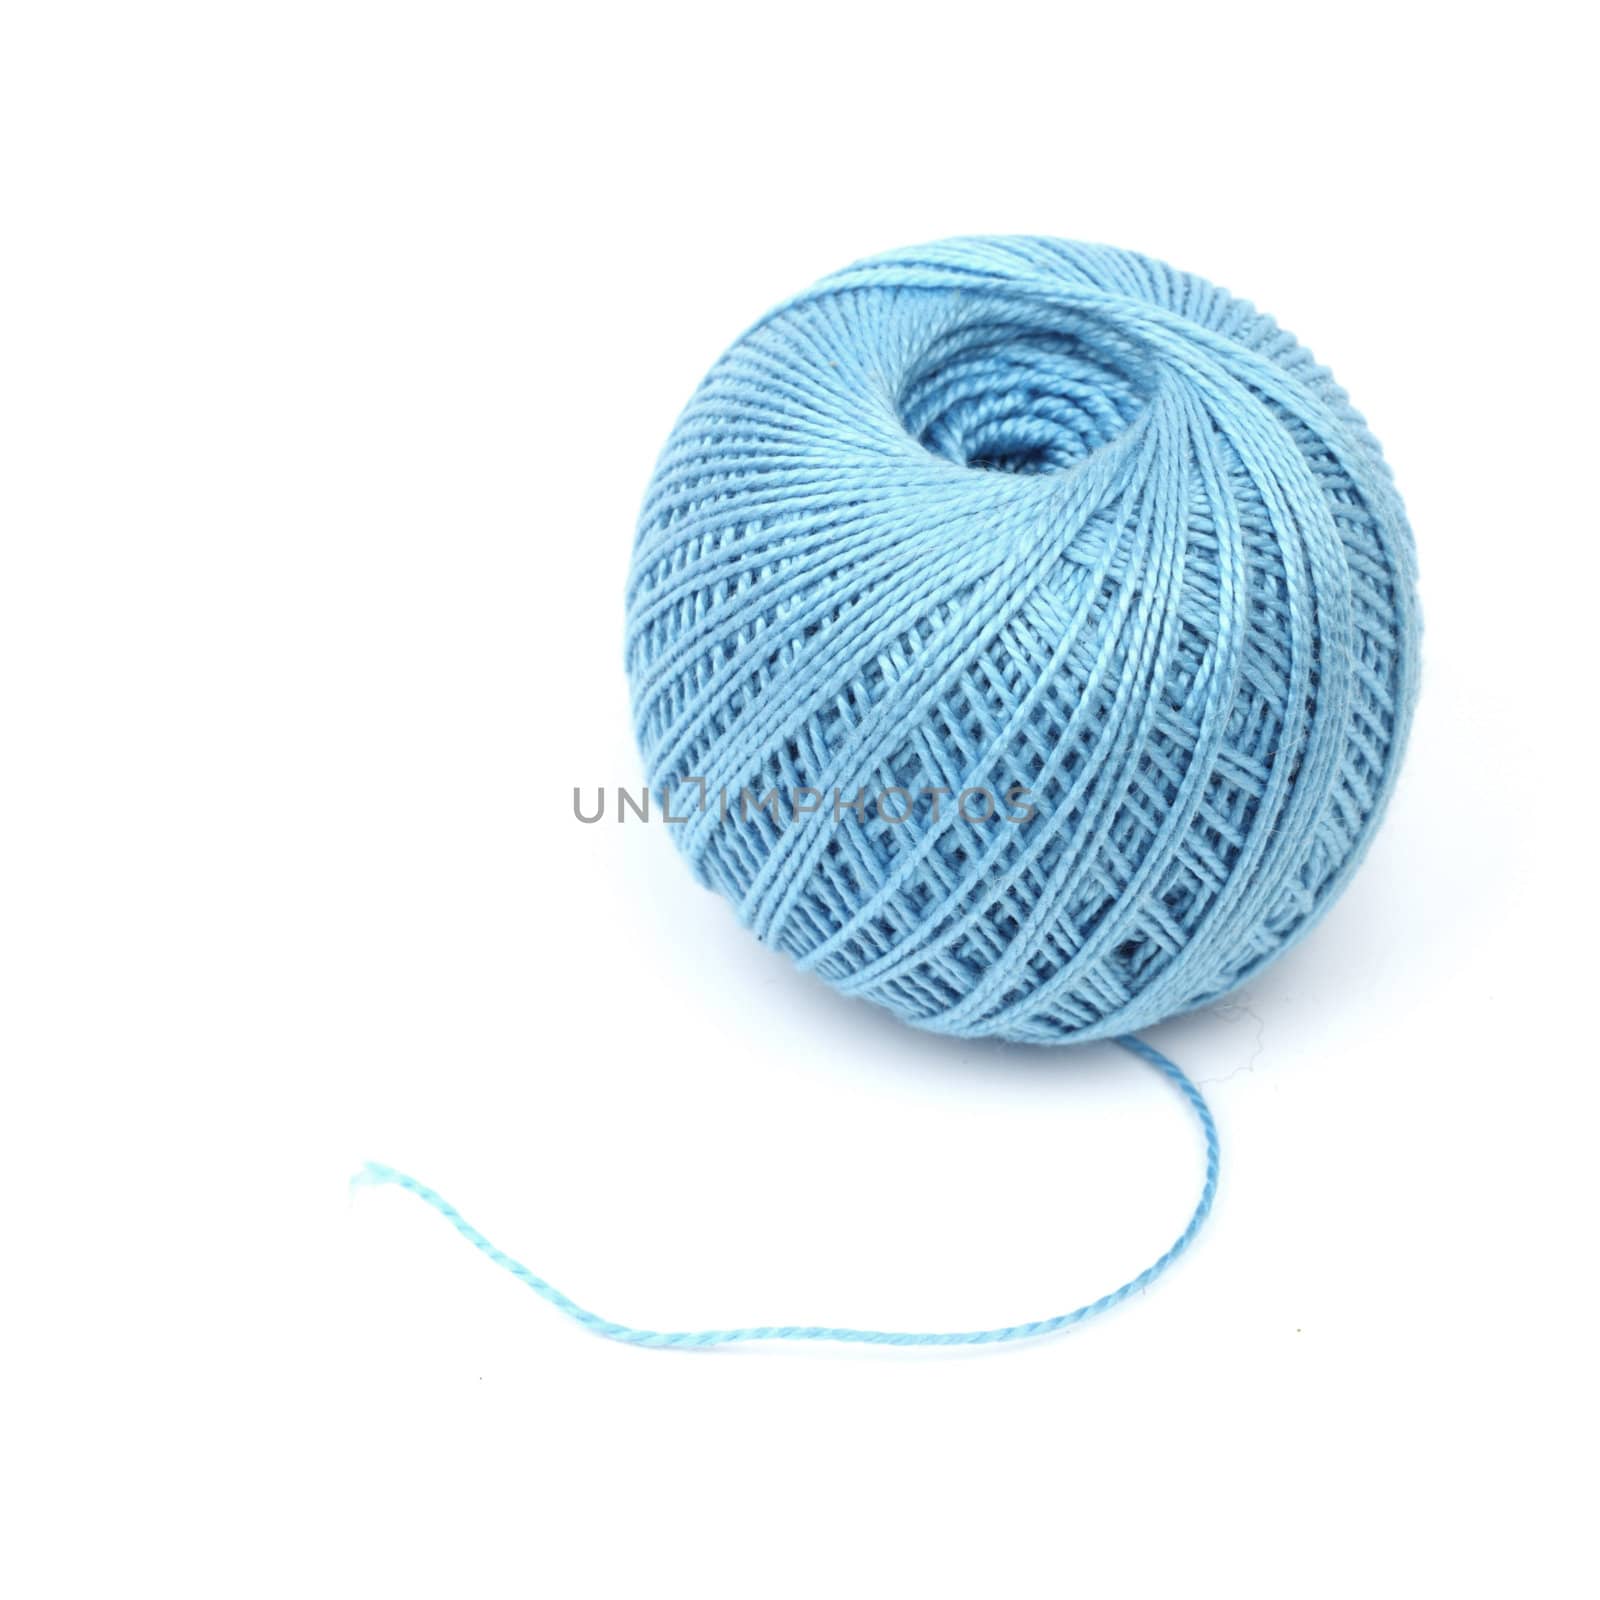 blue thread isolated on white background